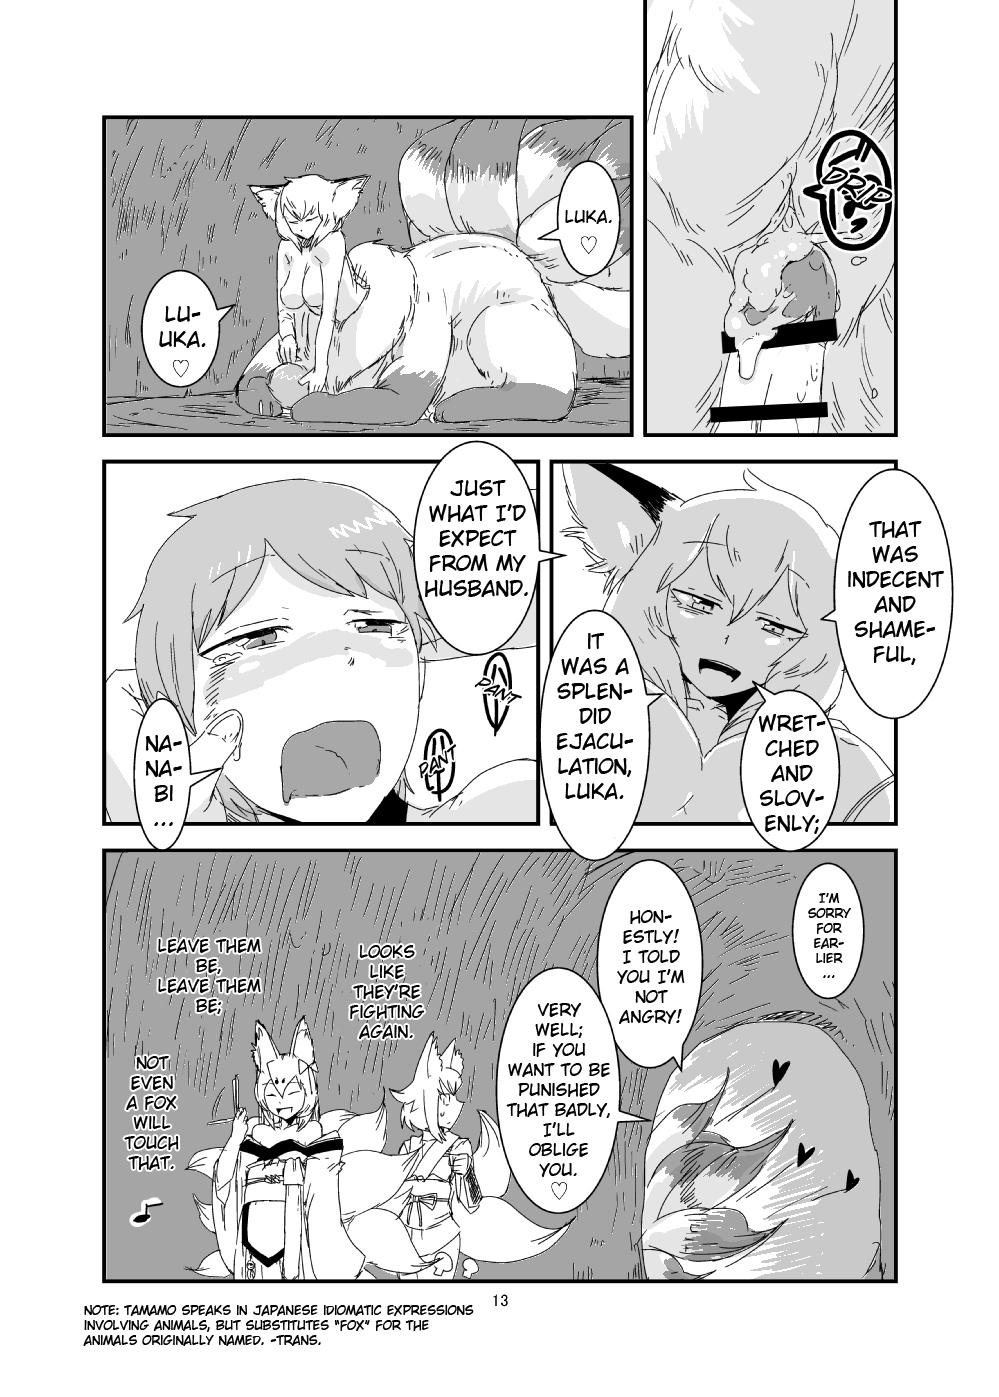 18 Year Old Porn Mon Musu Quest! Beyond The End - Monster girl quest Gay Bus - Page 12